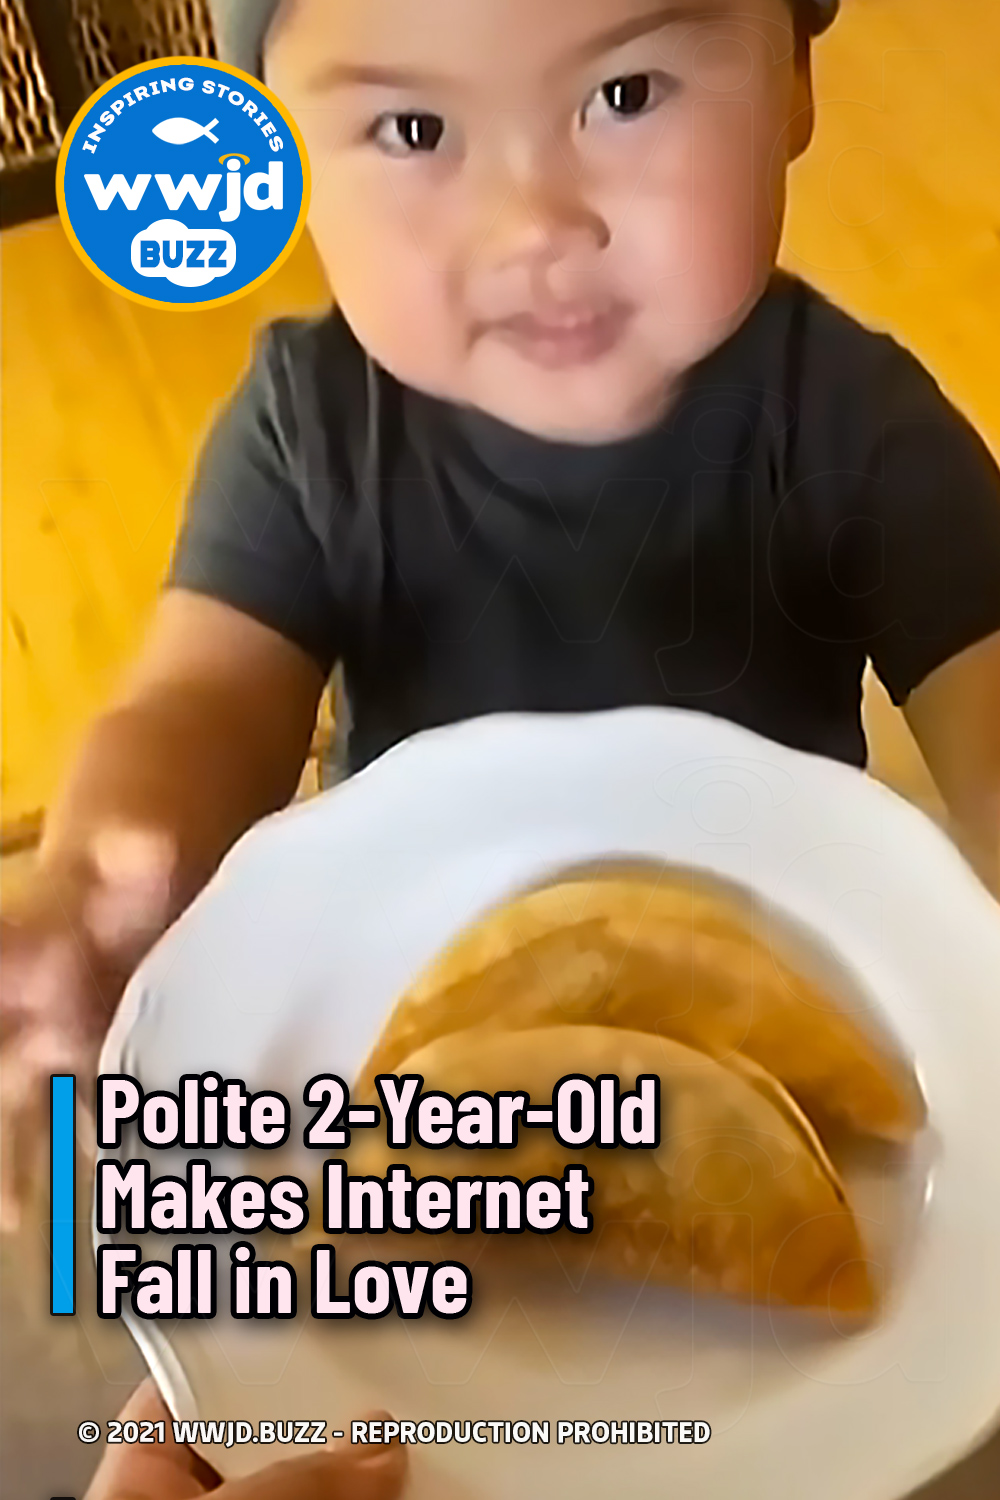 Polite 2-Year-Old Makes Internet Fall in Love